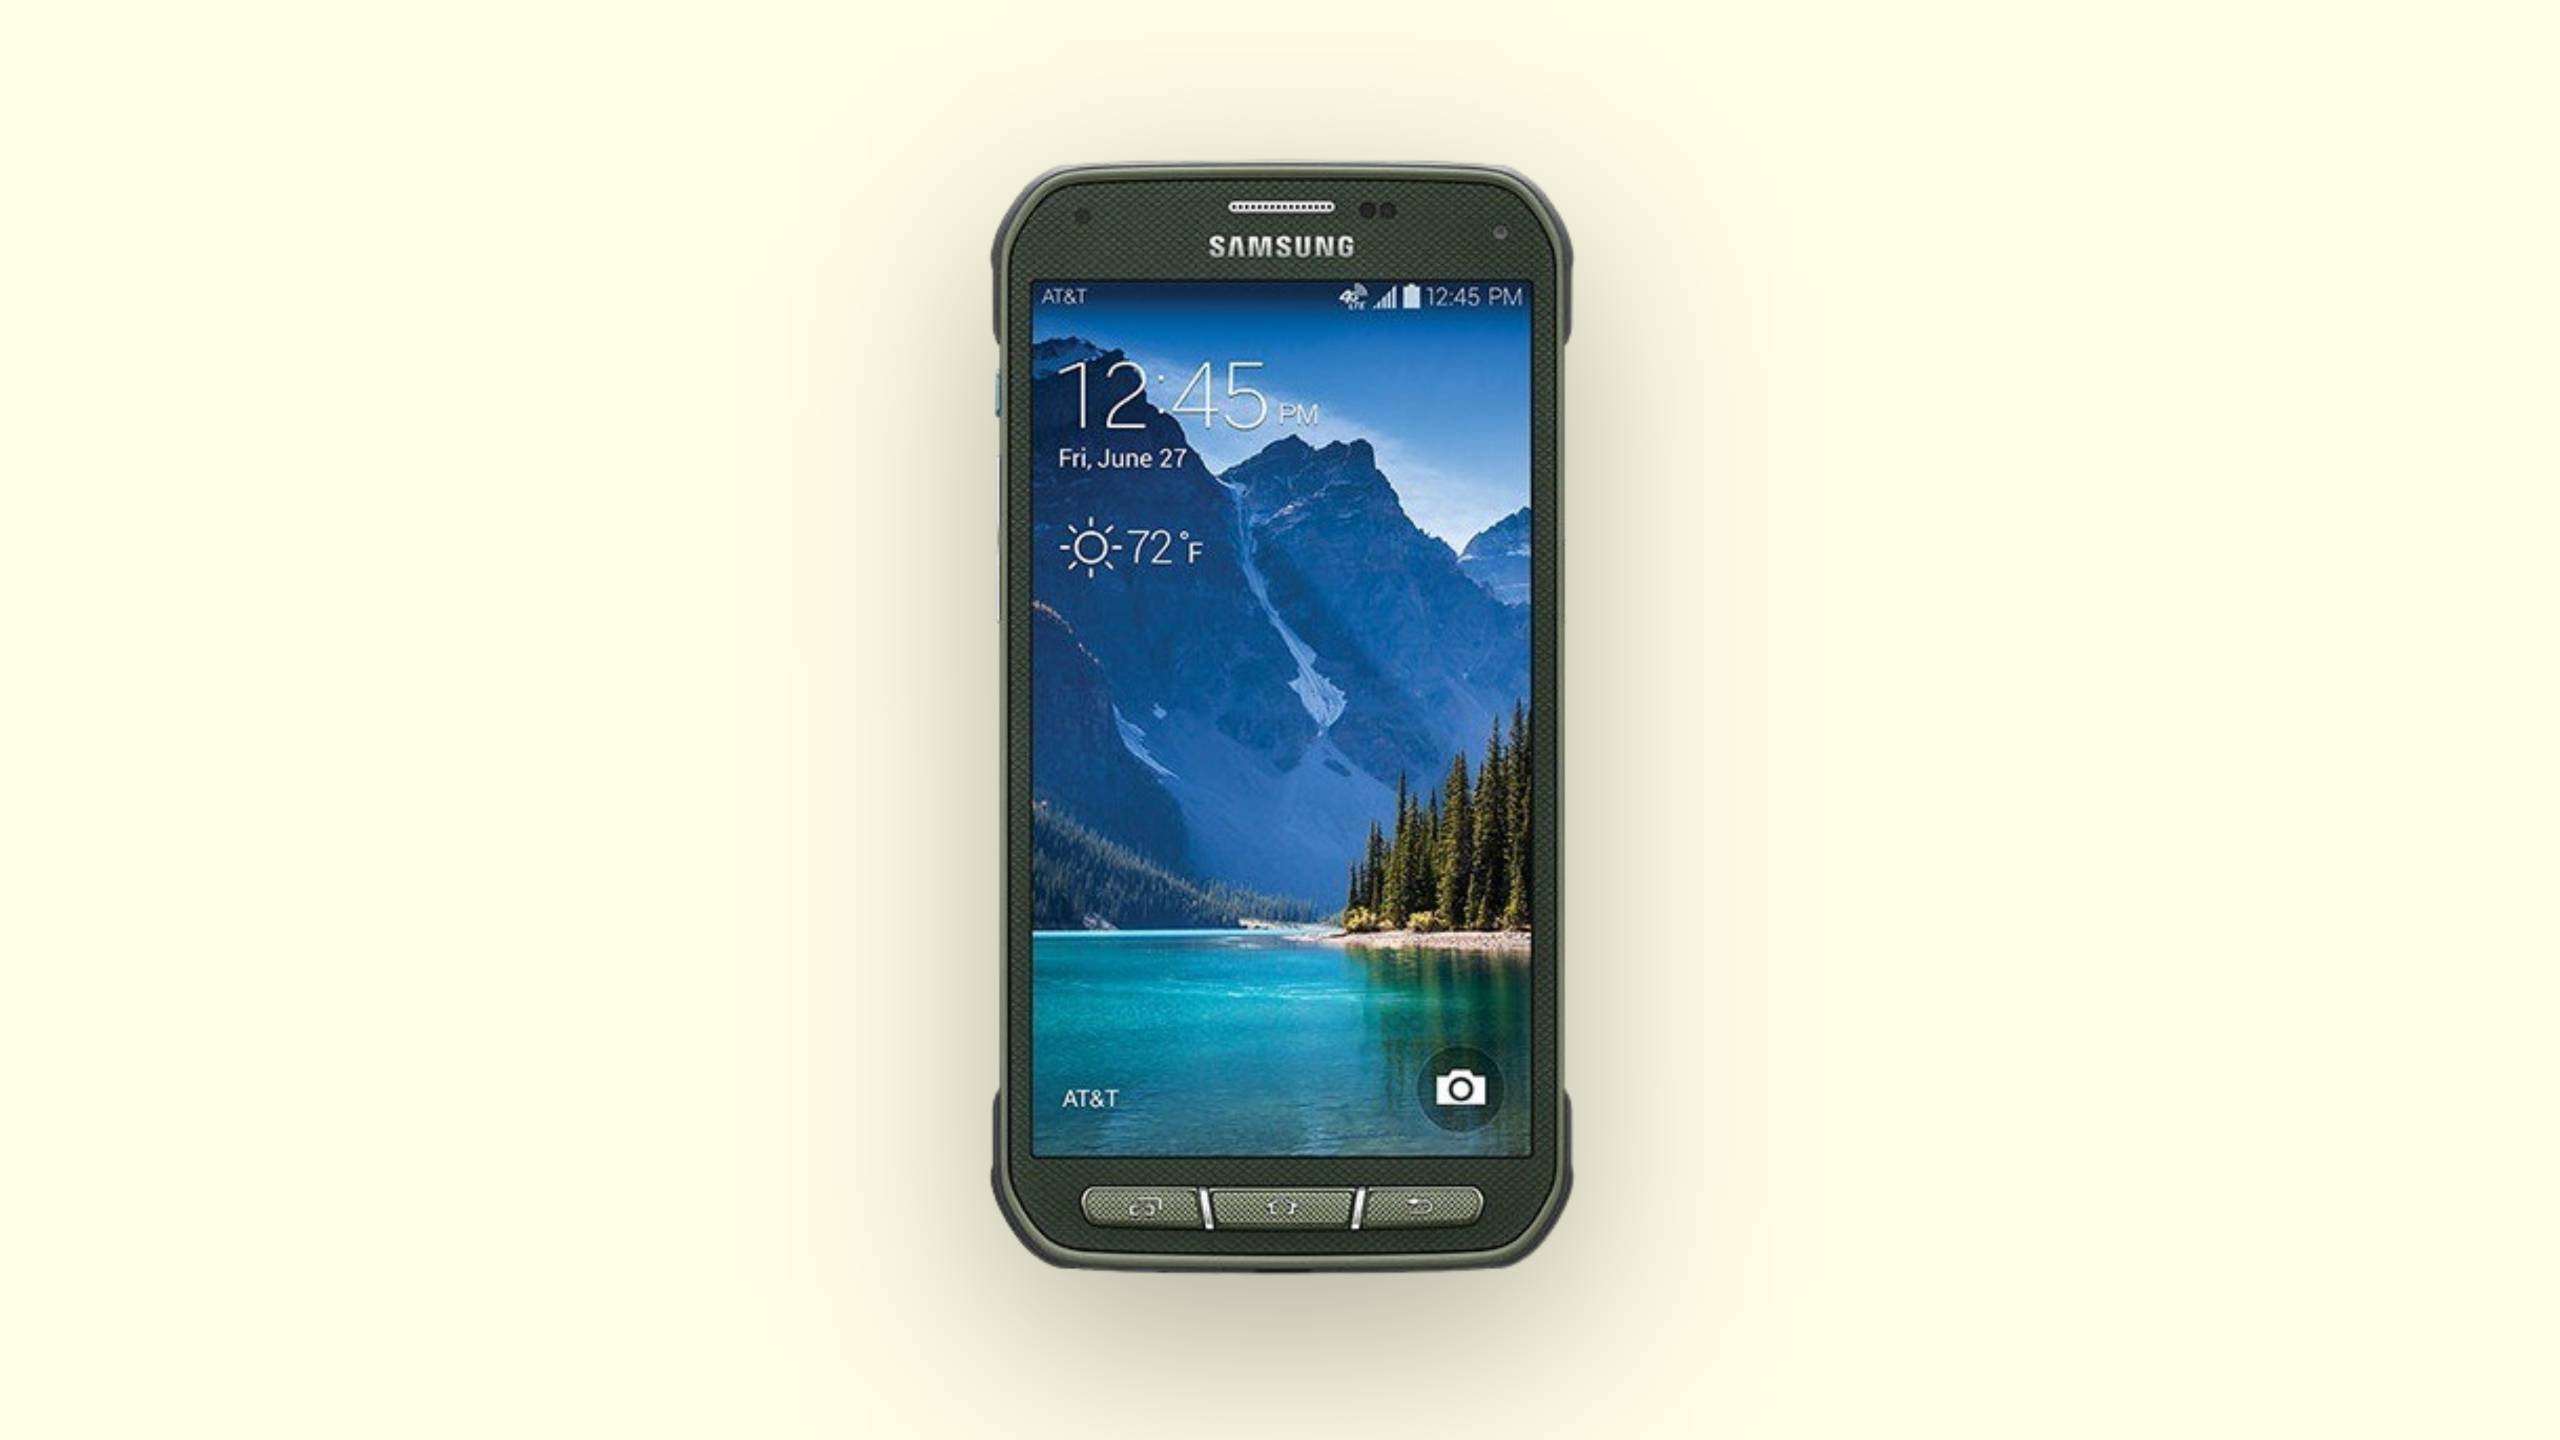 How To Root Samsung Galaxy S5 Active Sm-G870A